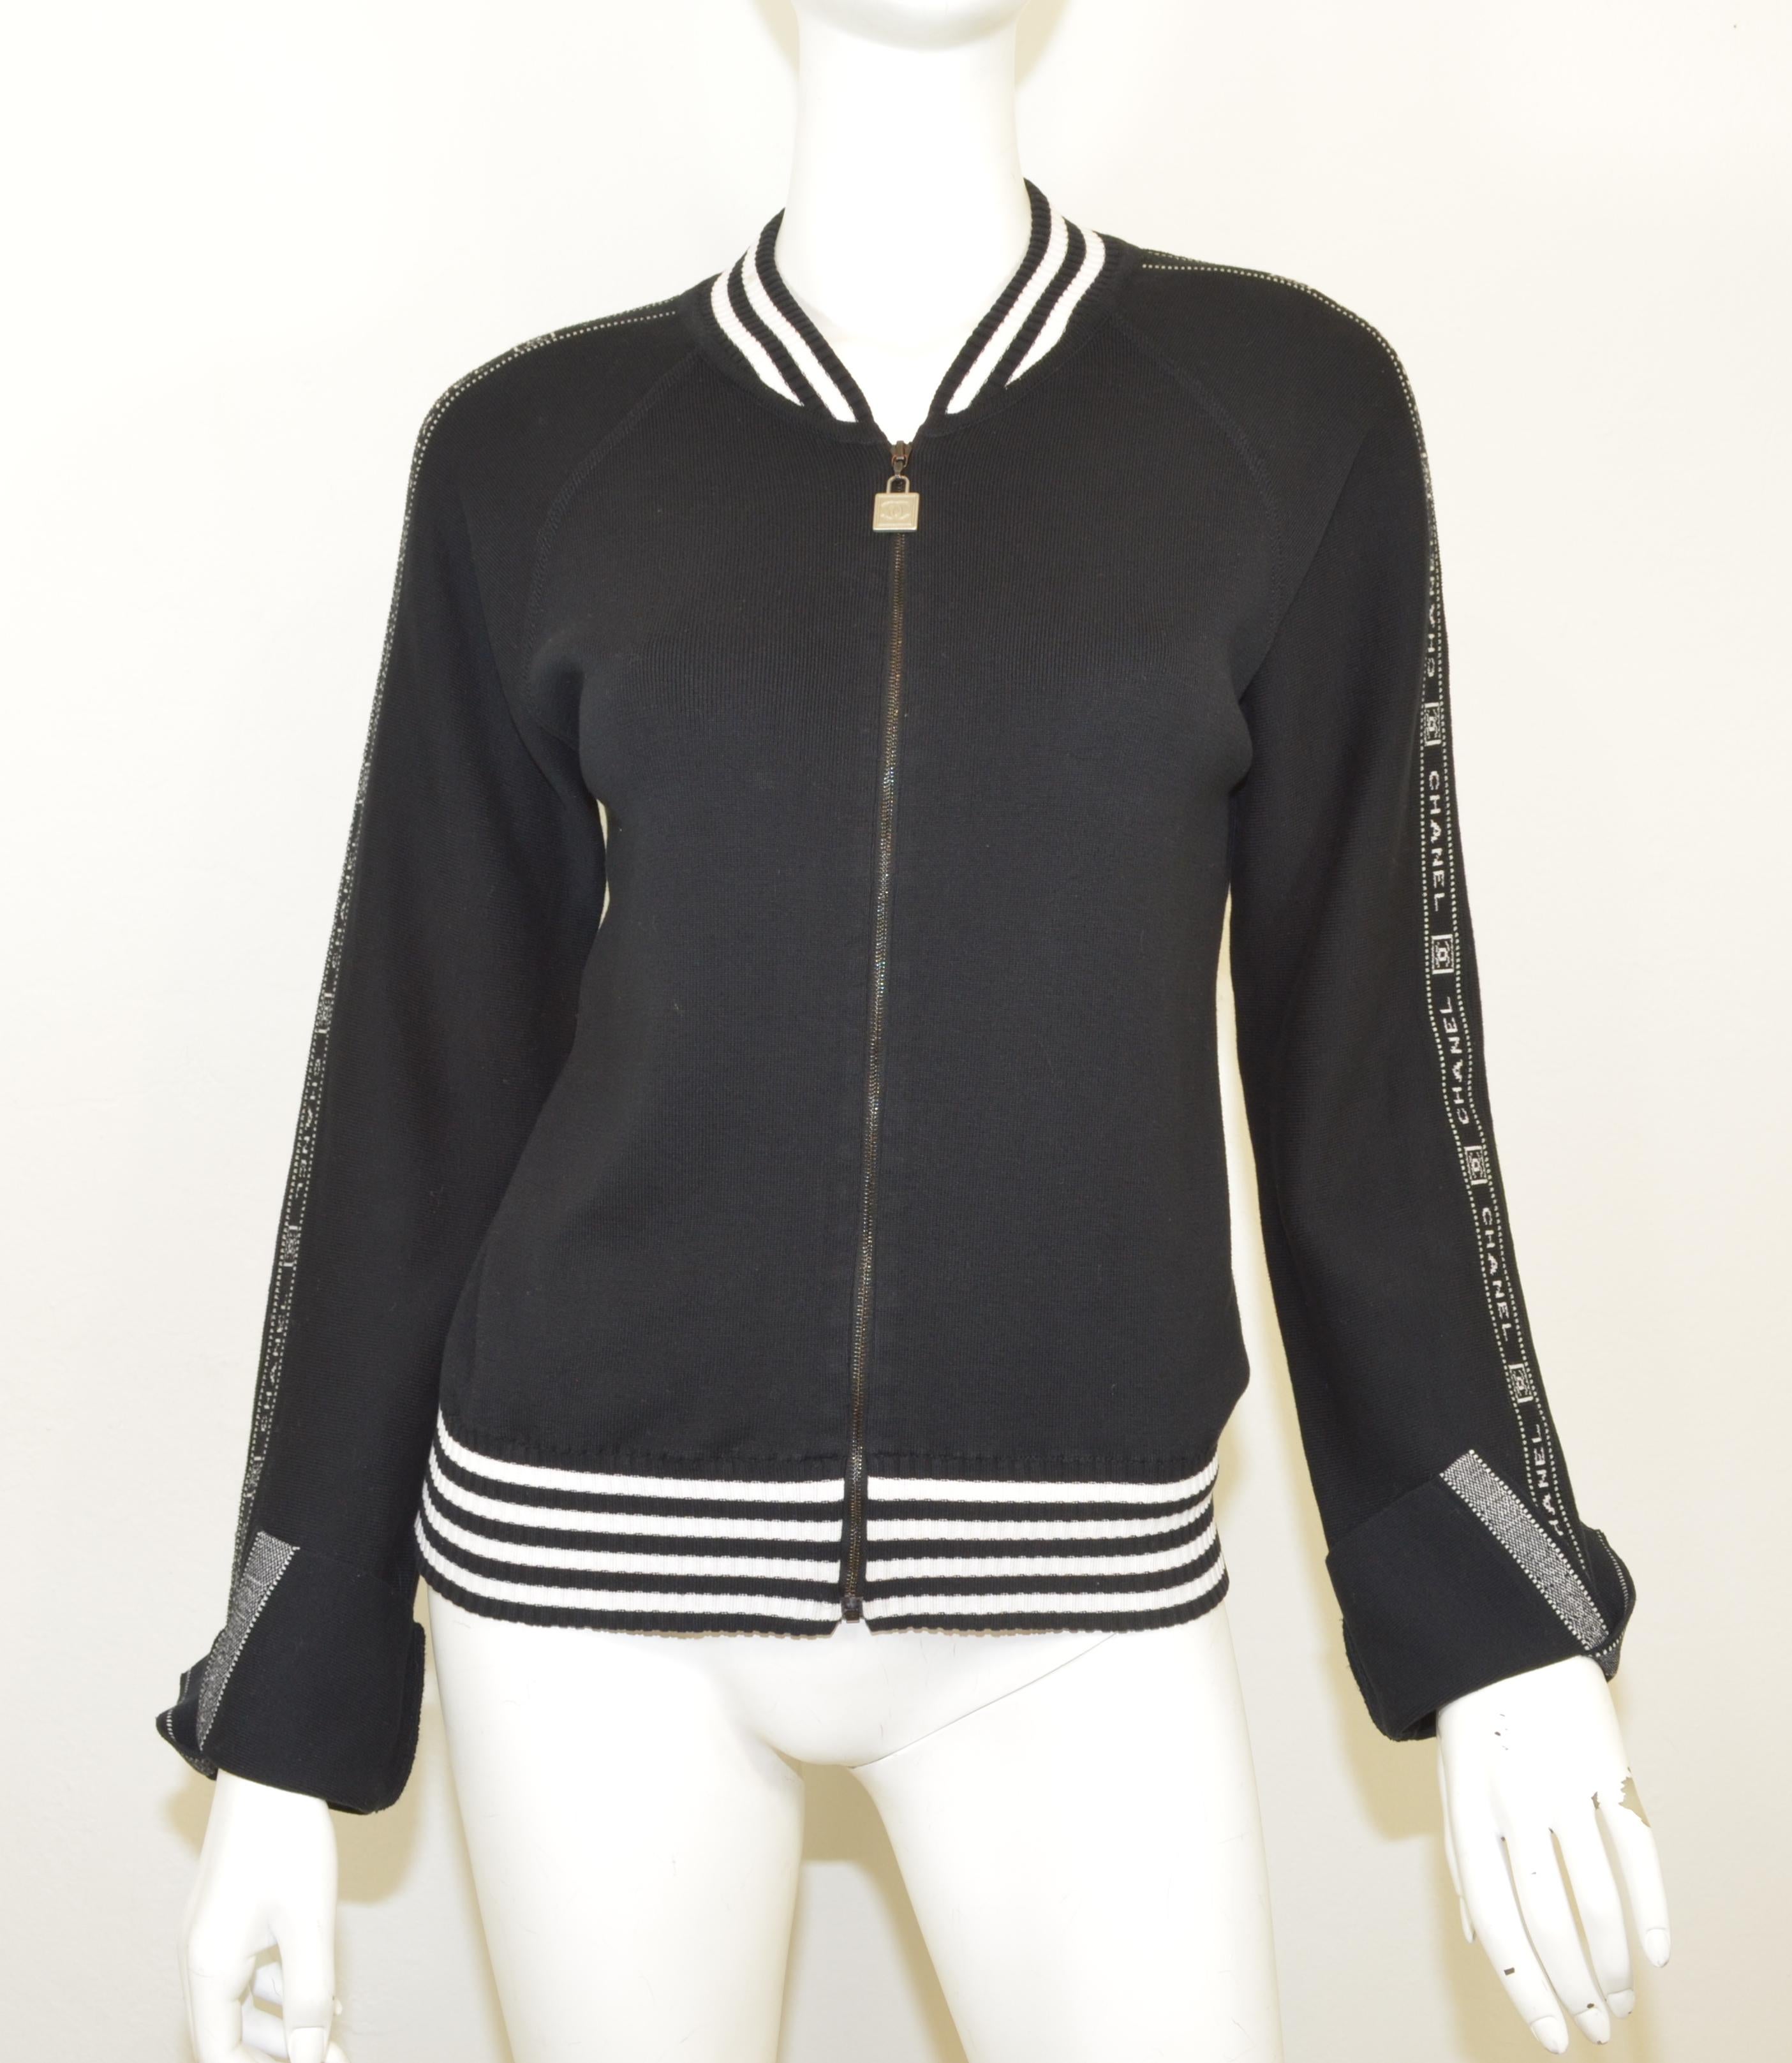 Chanel Identification 100% cotton logo black and white track jacket from 2004. Stretch knit black zip front with a CC padlock zipper pull. White CHANEL CC ribbon trim down the sleeves. Black and white striped ribbed waistband and neck. Long sleeves